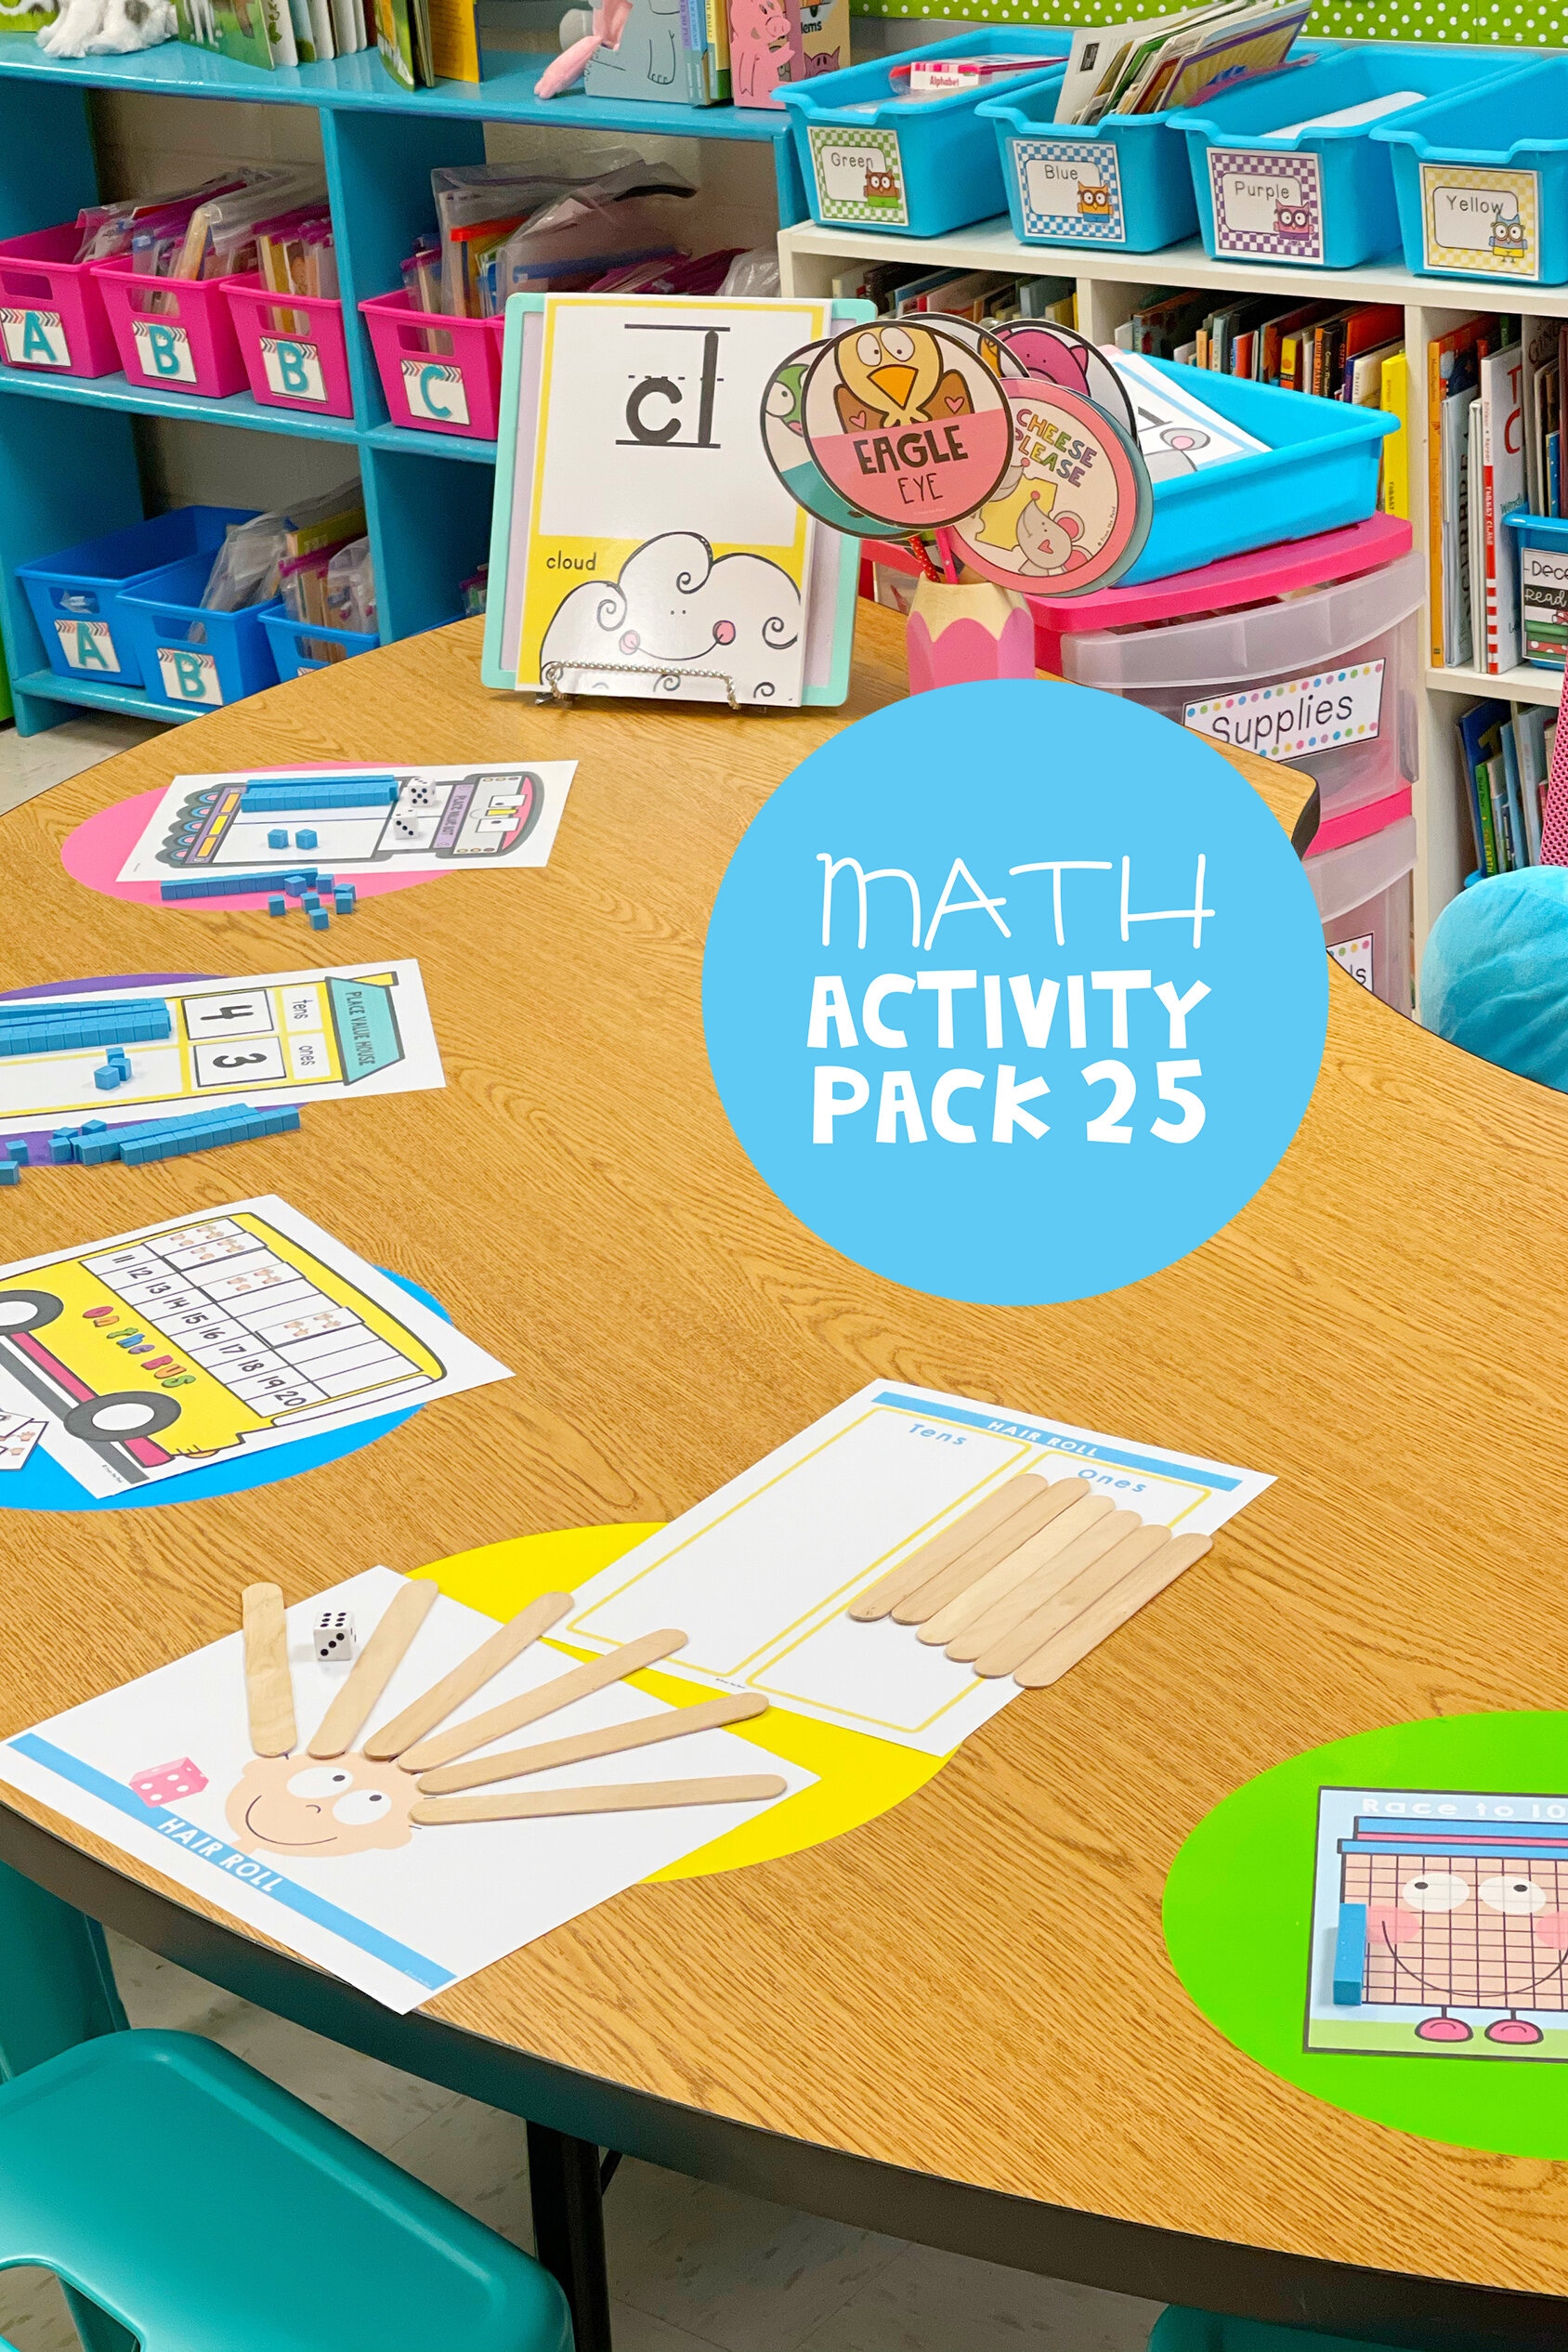 Place Value Activities